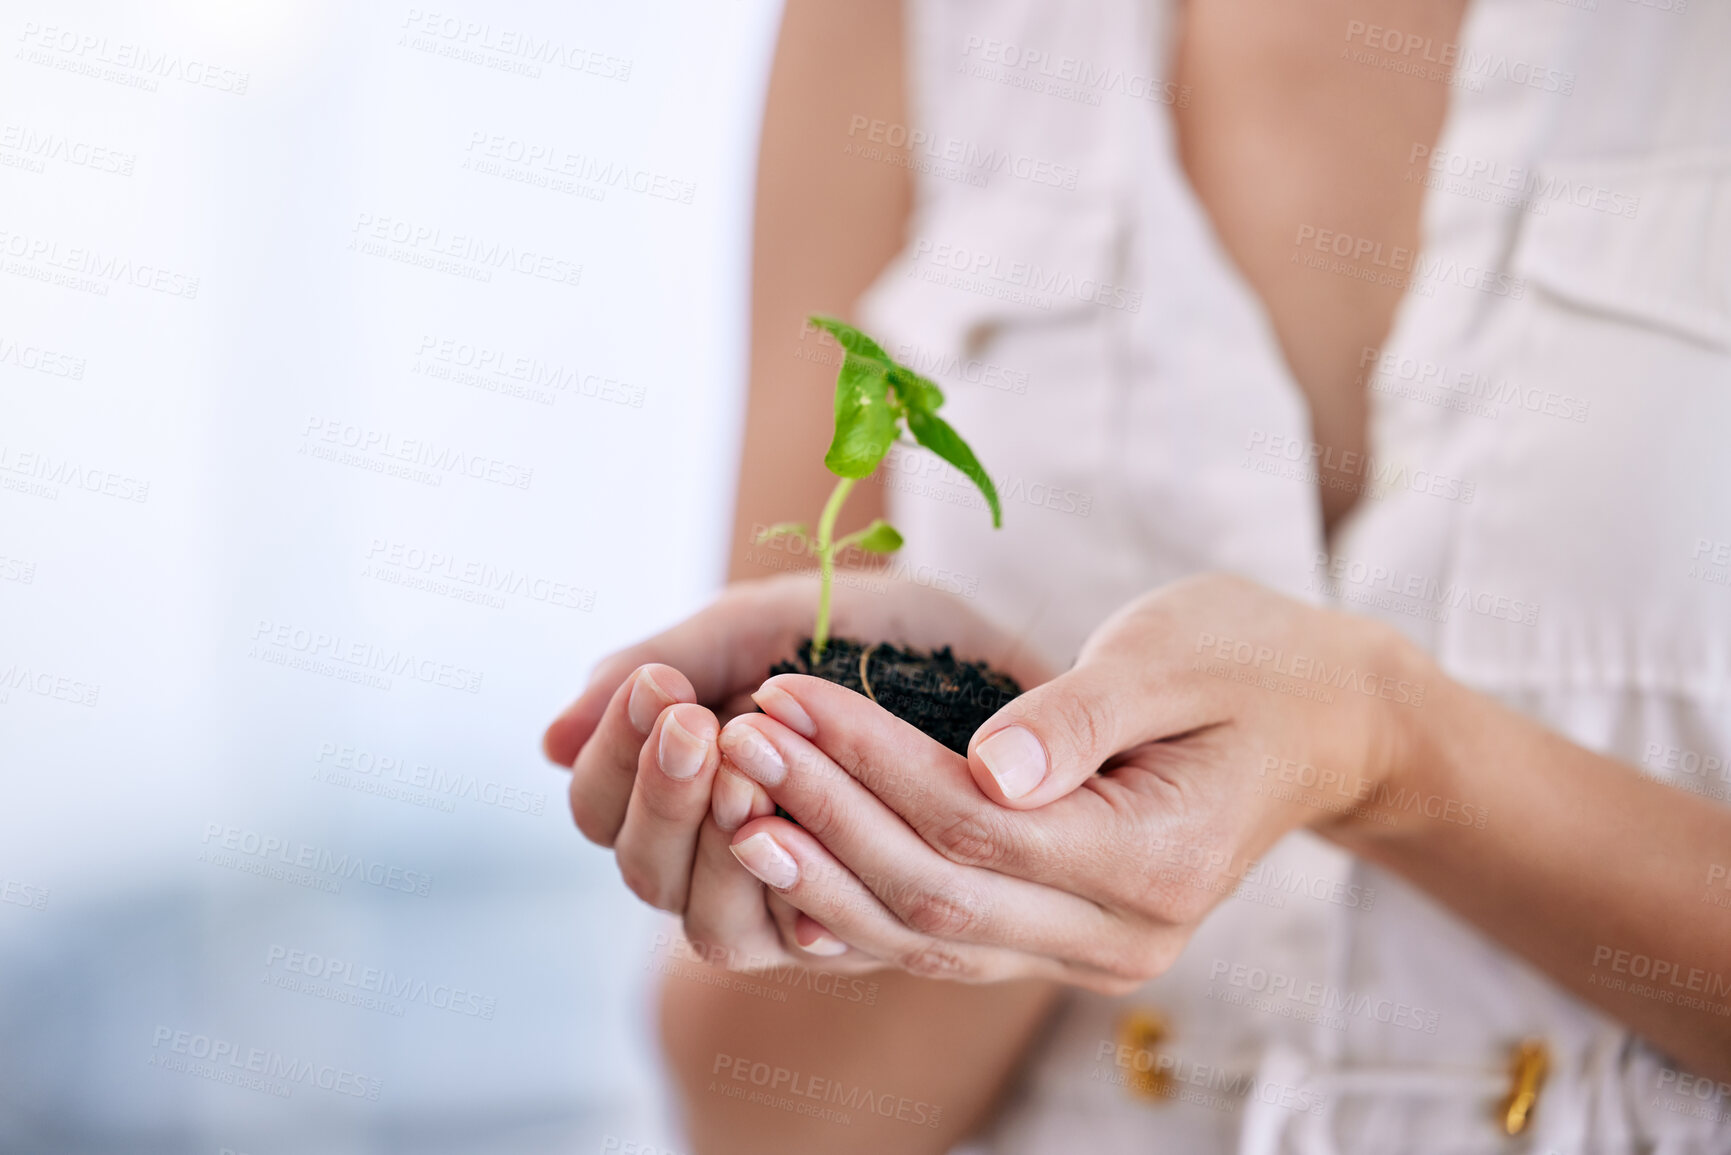 Buy stock photo Unrecognizable businessperson holding a plant growing out of dirt in the palm of their hand. One unrecognizable person growing and nurturing a plant growing out of soil in their hand